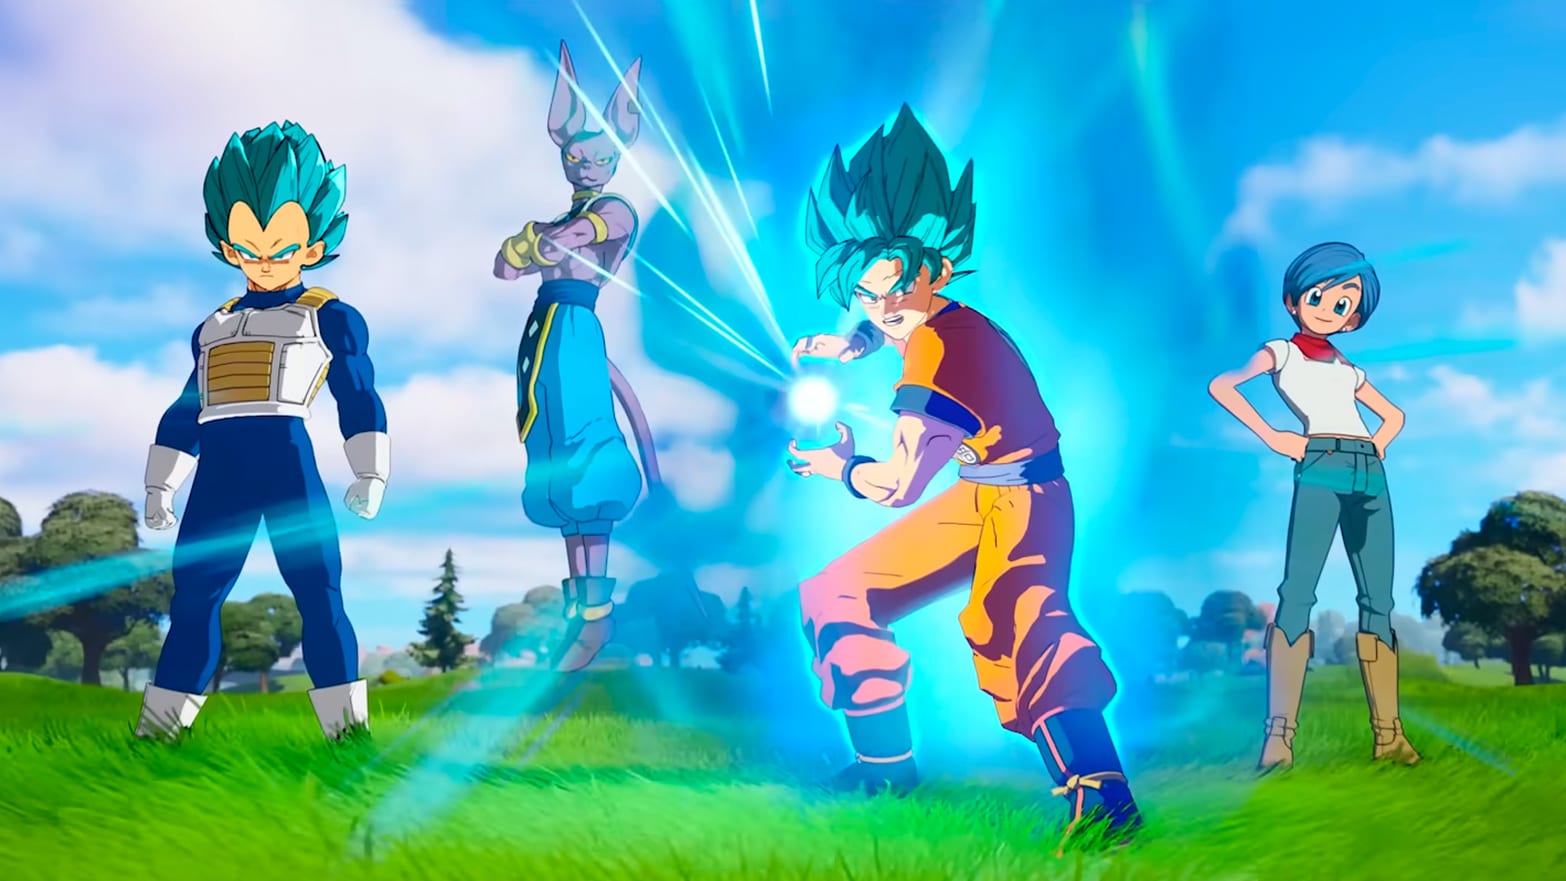 Fortnite' Players Cannot Stop Doing Absurd Things With The Goku And Dragon  Ball Z Collab